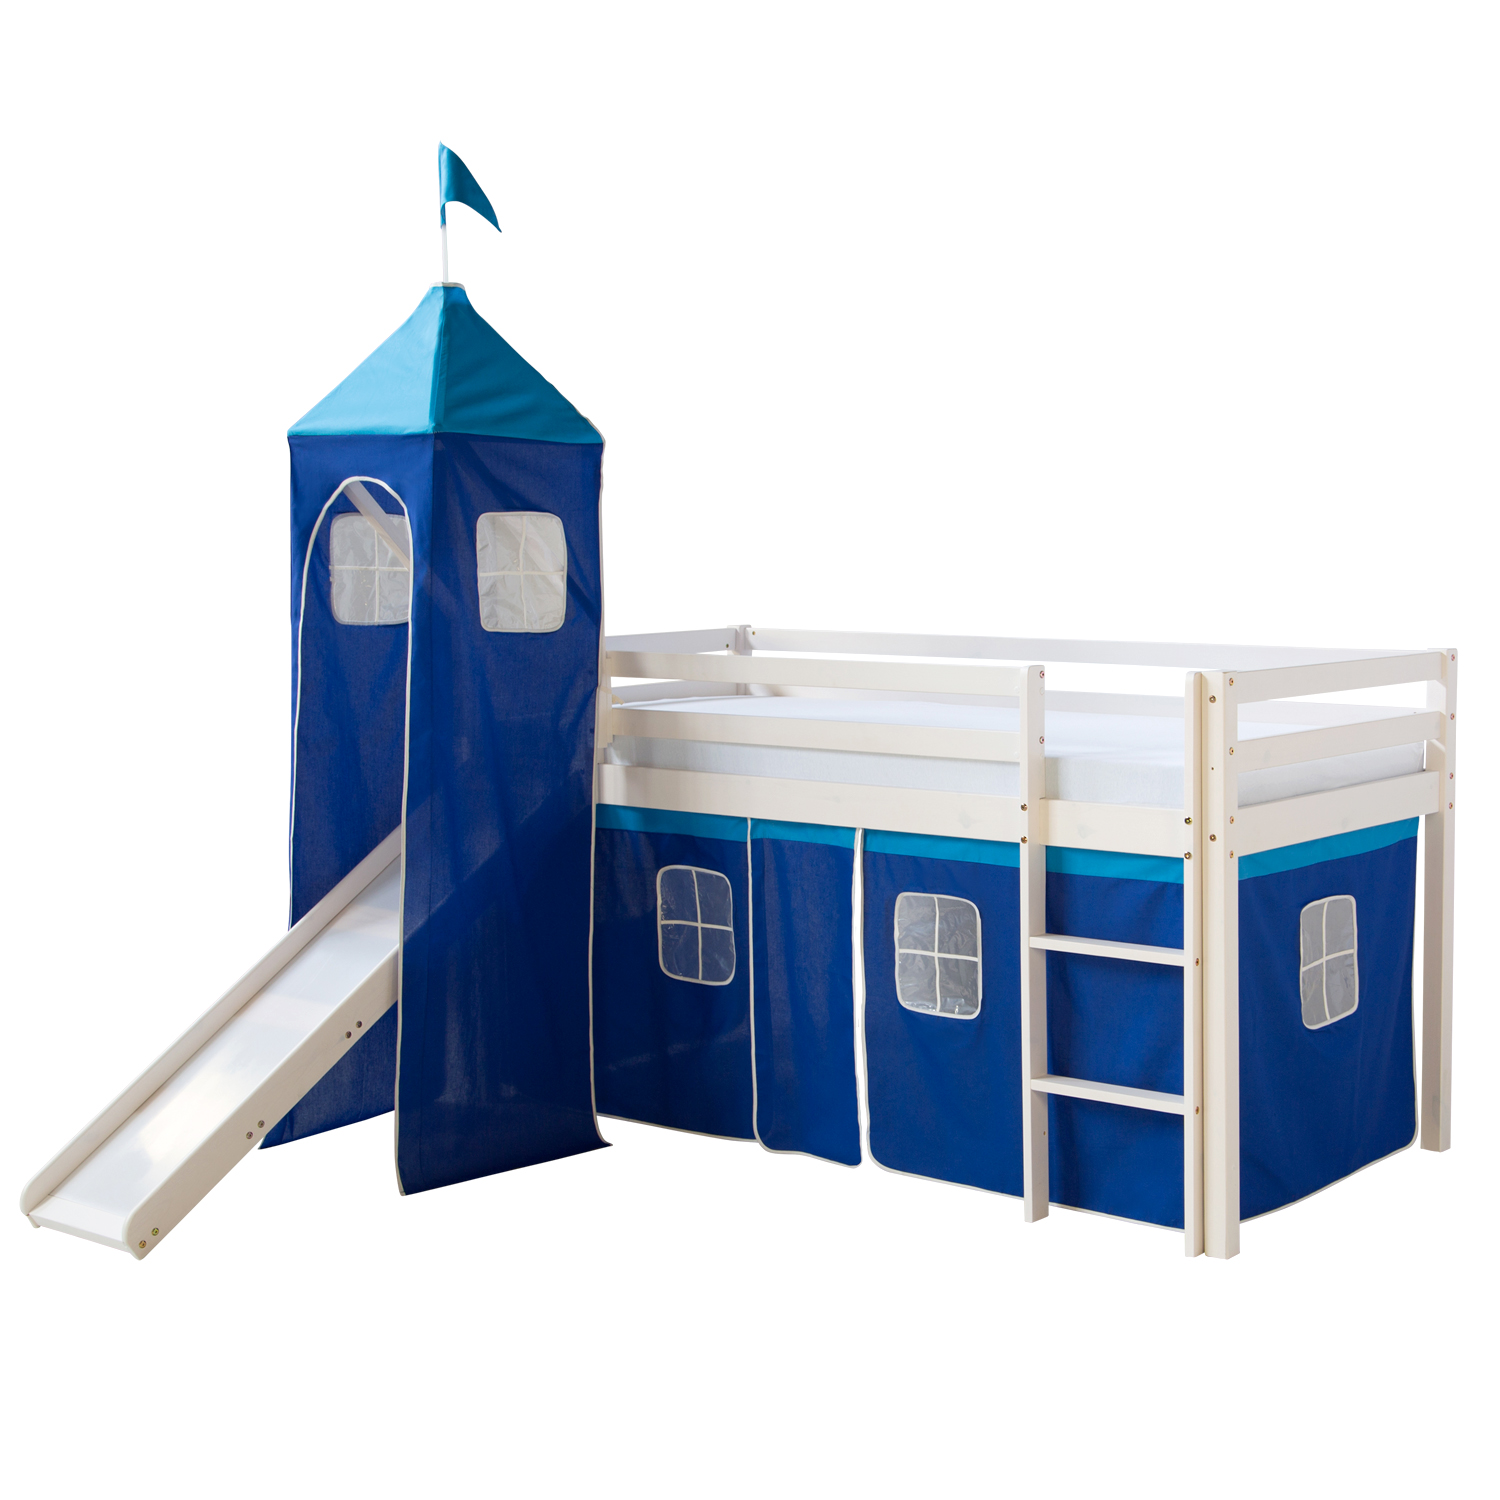 Loftbed 90x200 cm with Tower Slide Mattress Bunk bed Childrens bed Solid Pine Wood Slats Curtain Blue